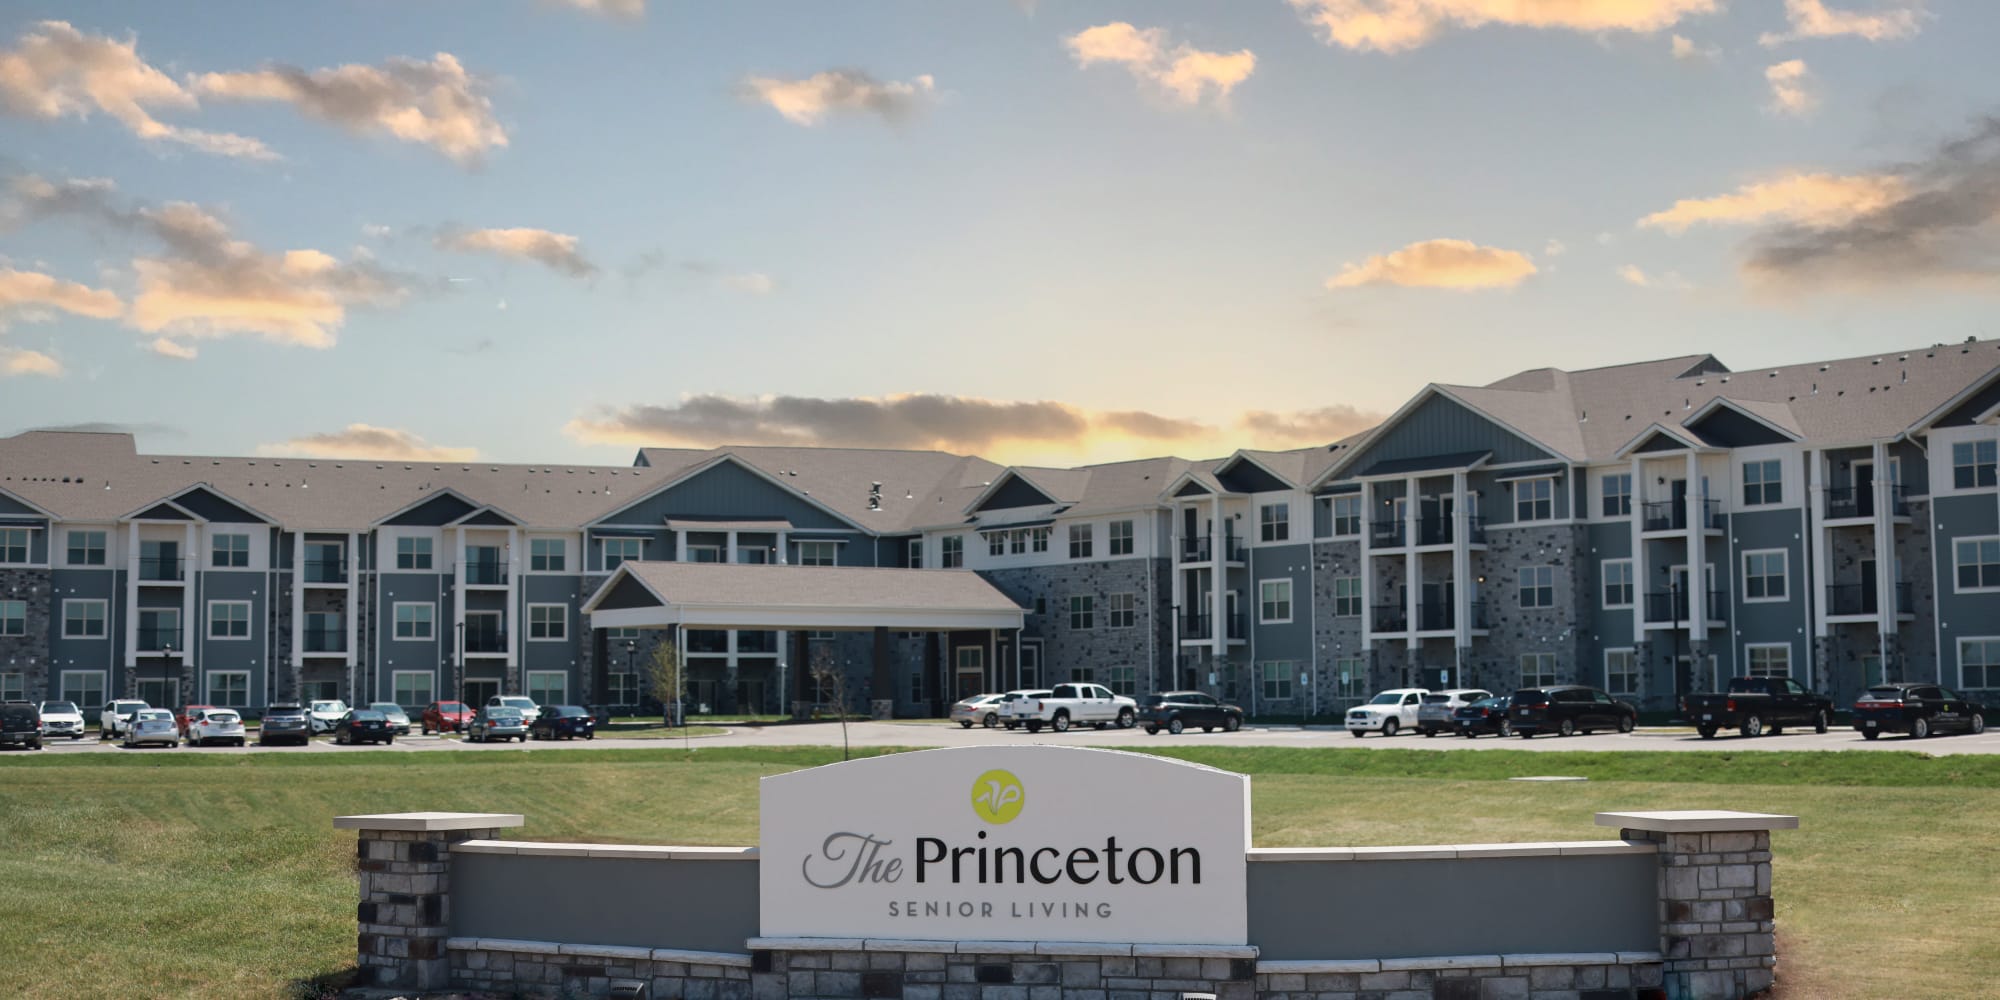 Photo Gallery at The Princeton Senior Living in Lee's Summit, Missouri